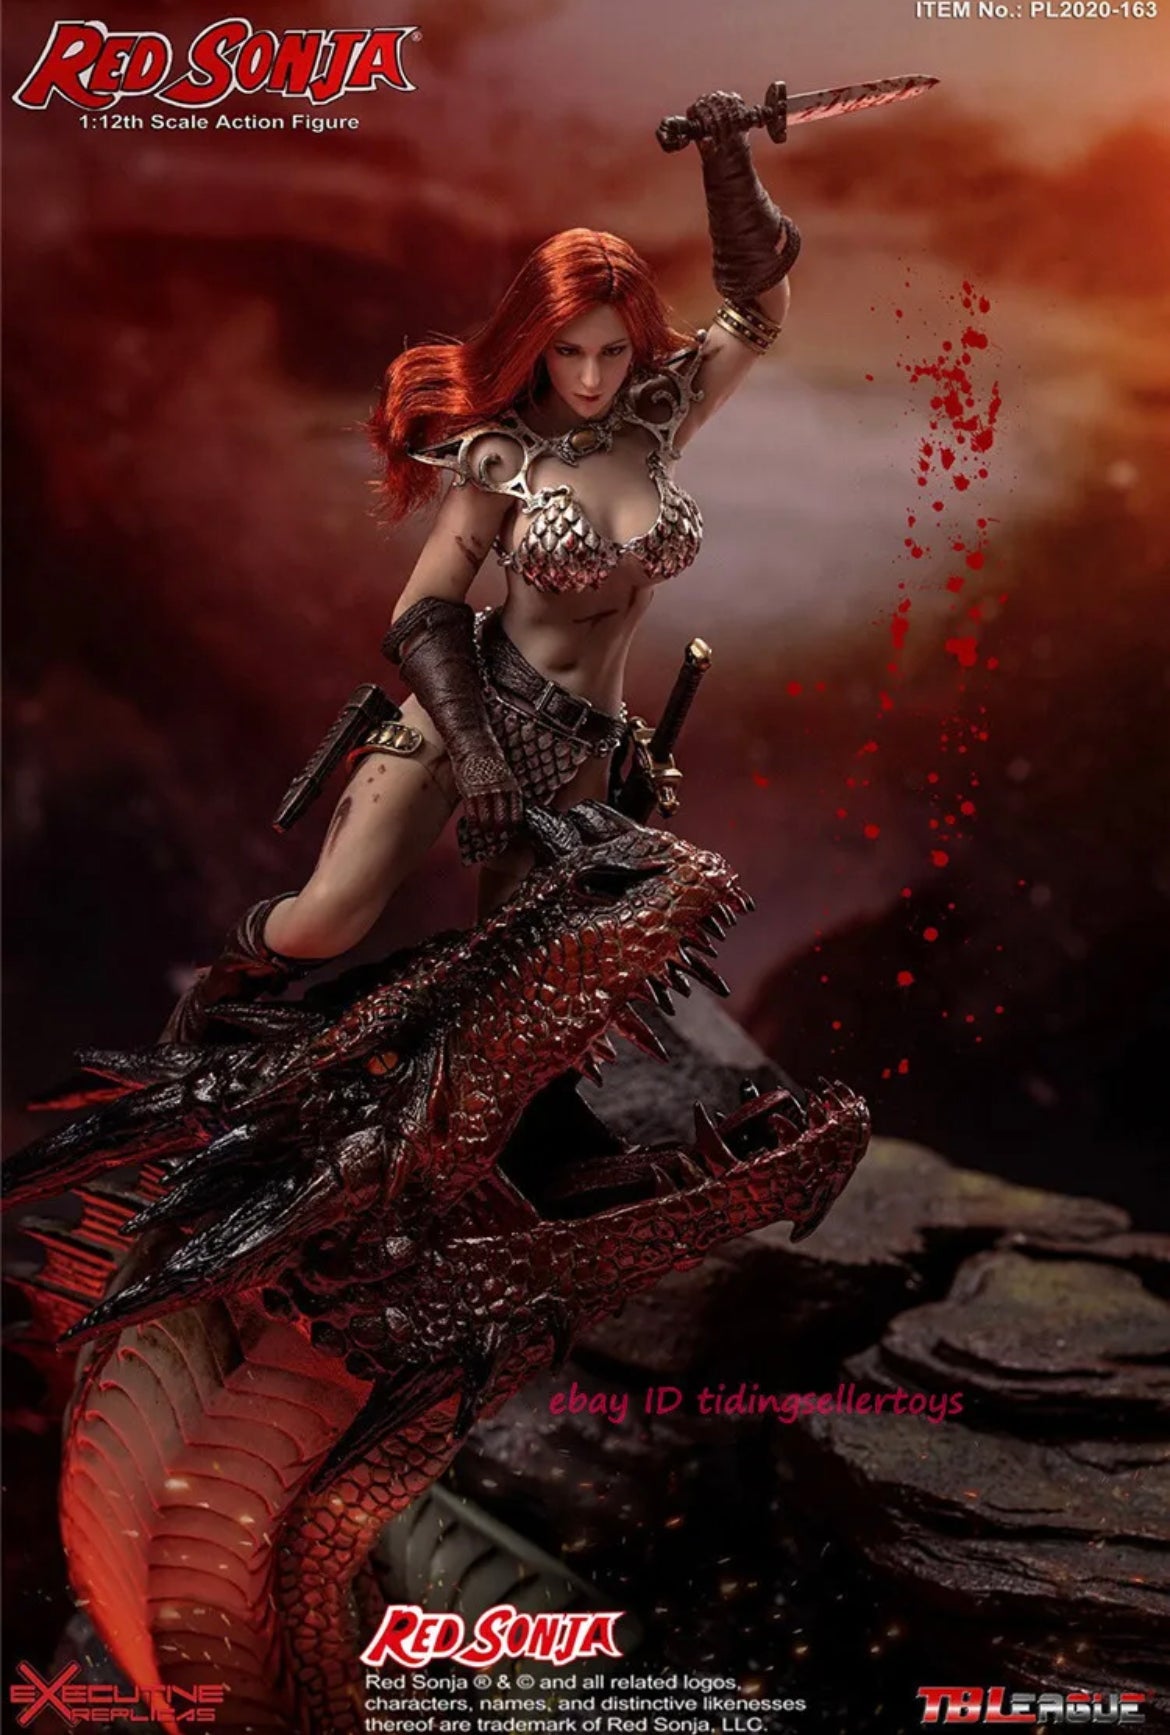 TBLeague Red Sonja 1/12 Scale Action Figure Collectible PL2020-163 Phicen